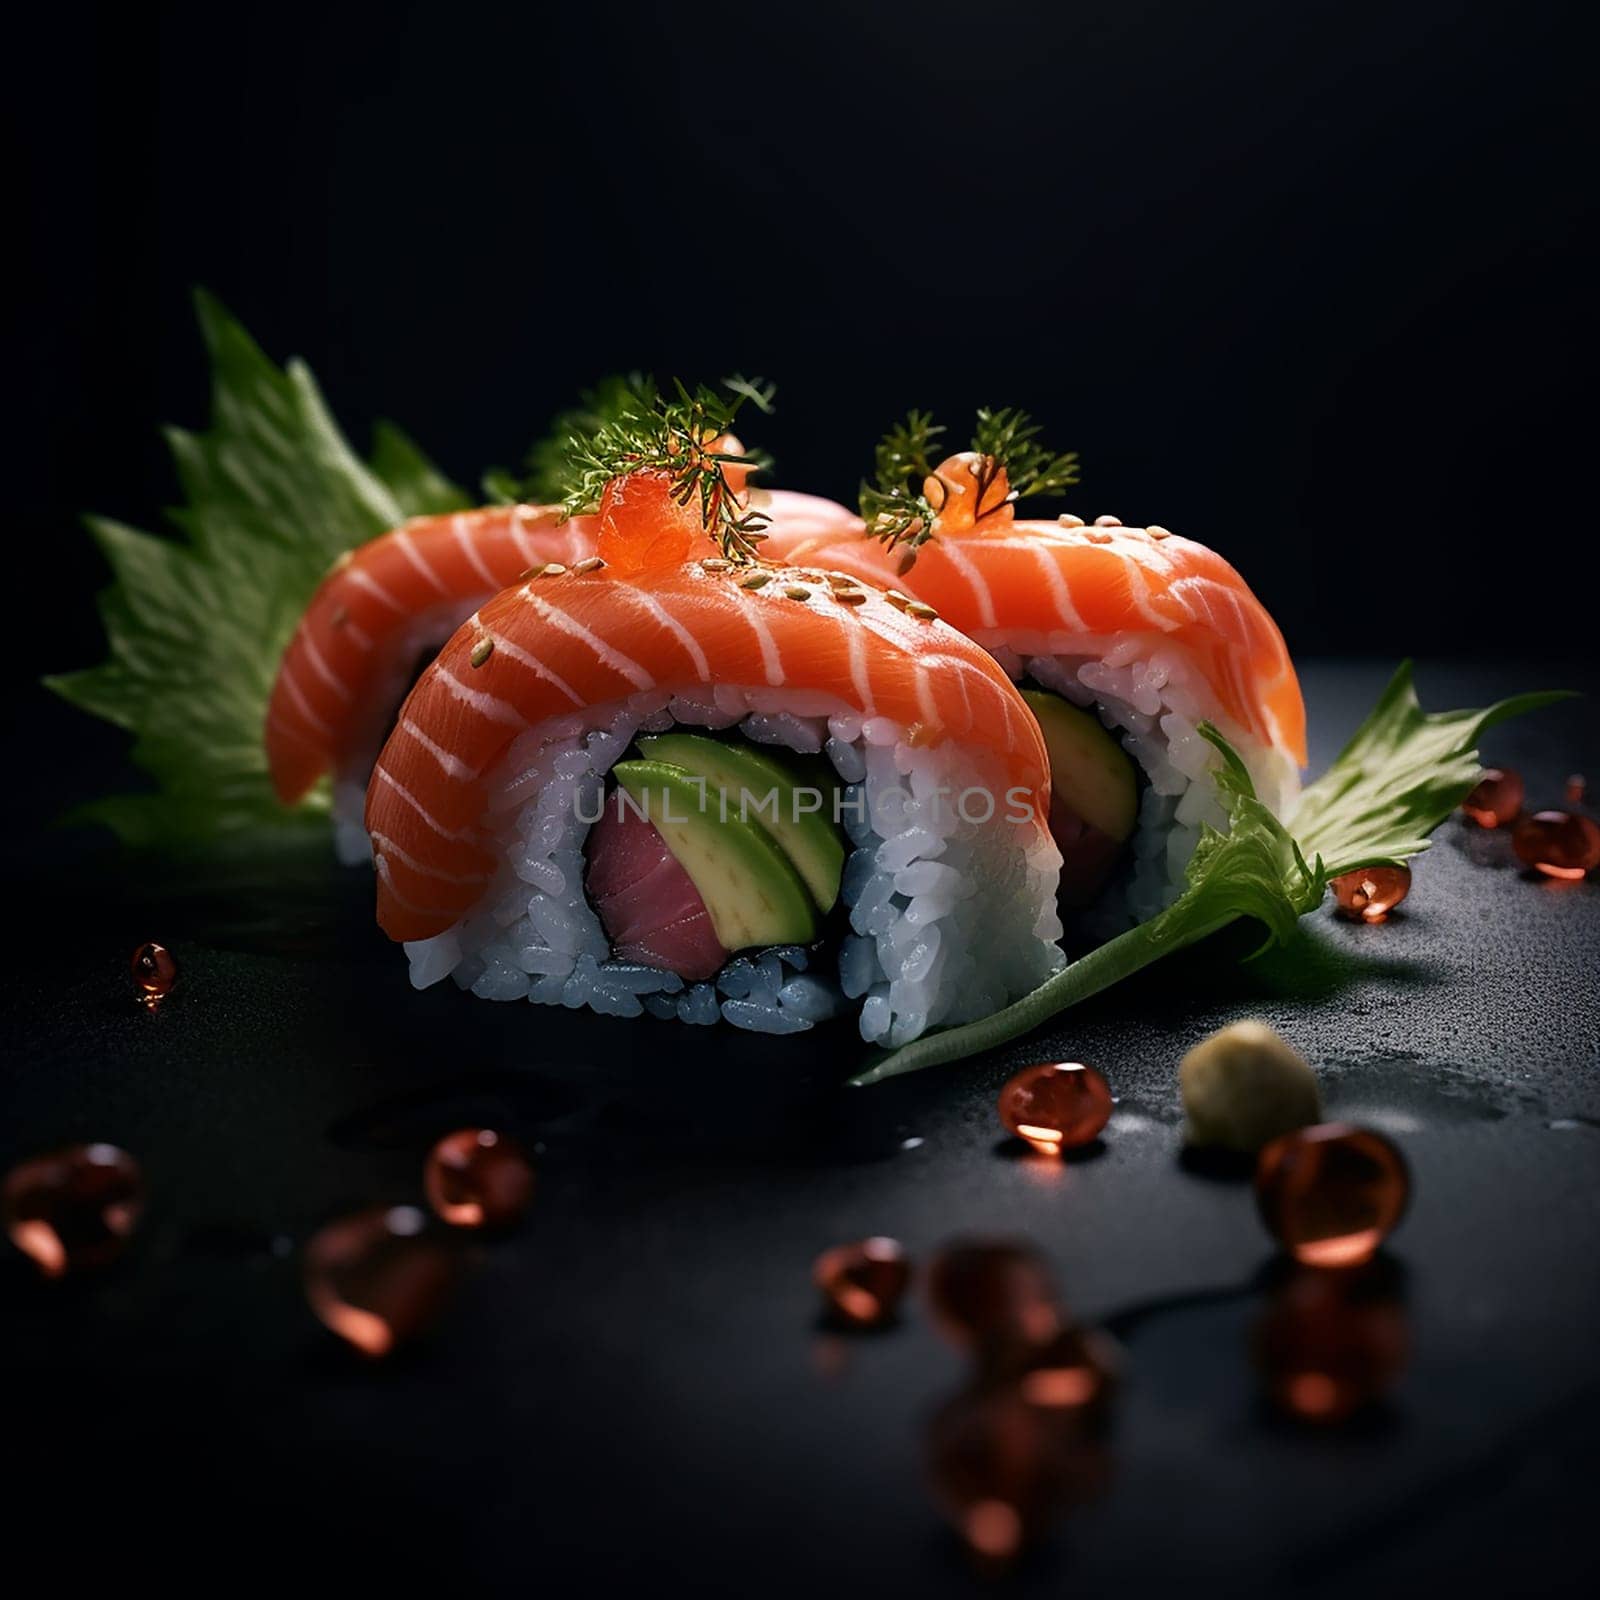 Two pieces of sushi with salmon and avocado garnished with herbs.